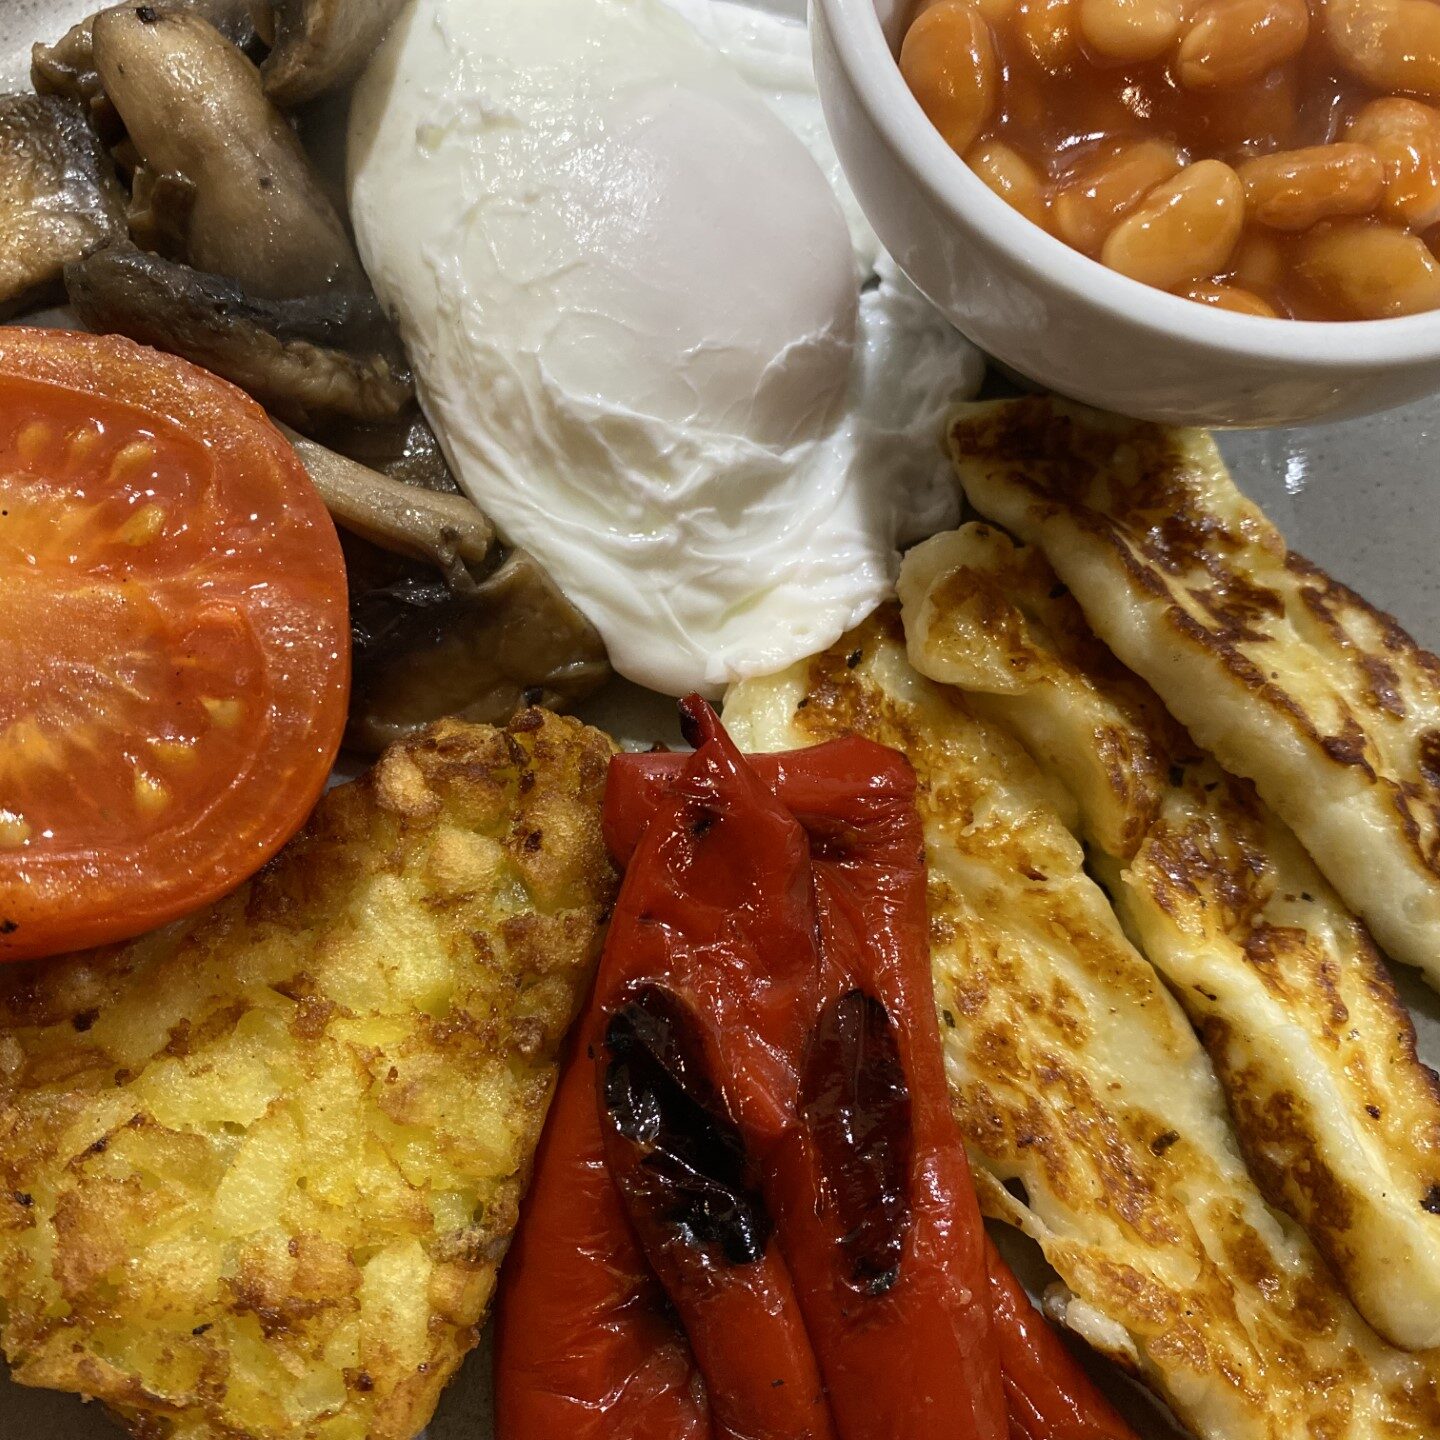 Goodwin Guest House in Keswick Lake District B & B Vegetarian V Breakfast Halloumi Roasted red pepper Hash Brown Grilled Tomato Sauteed Mushrooms Baked Beans Poach Eggs